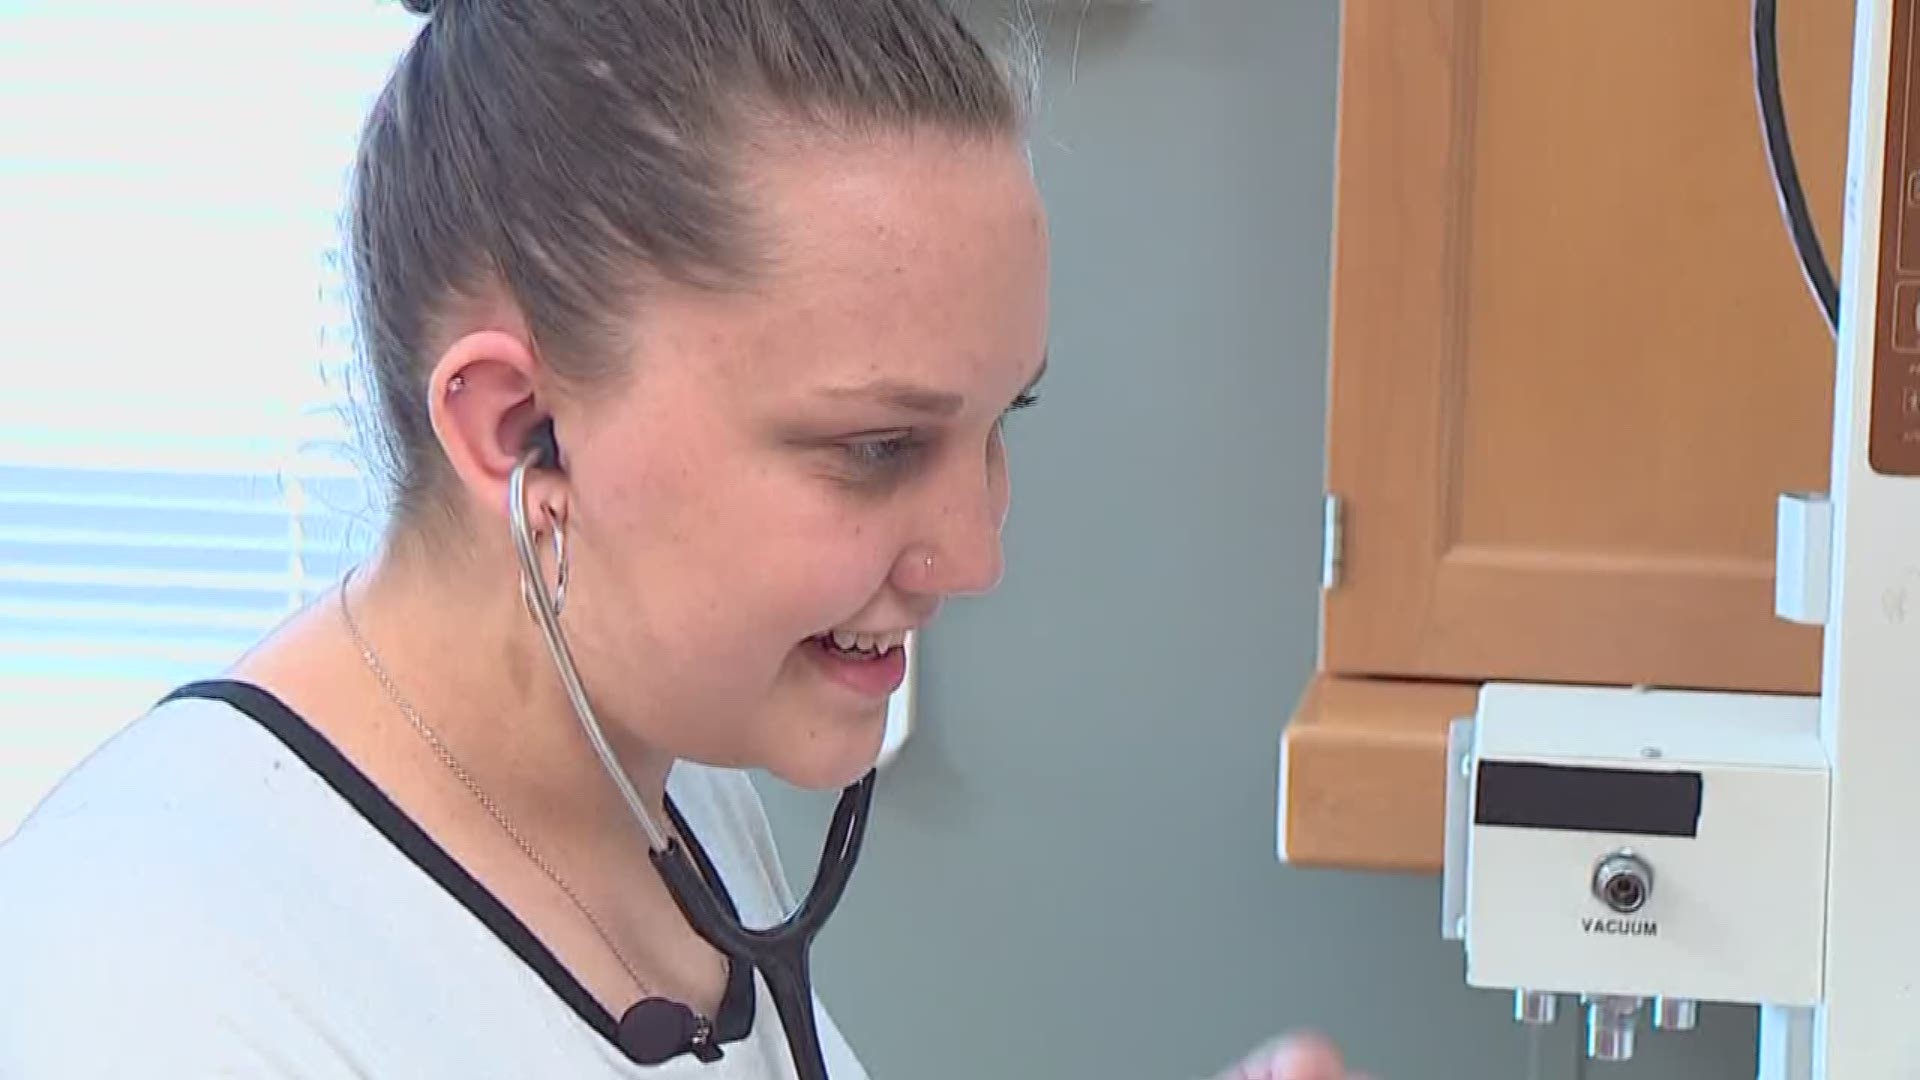 Nurses save lives every day, and 16-year-old Destiny wants to do just that.